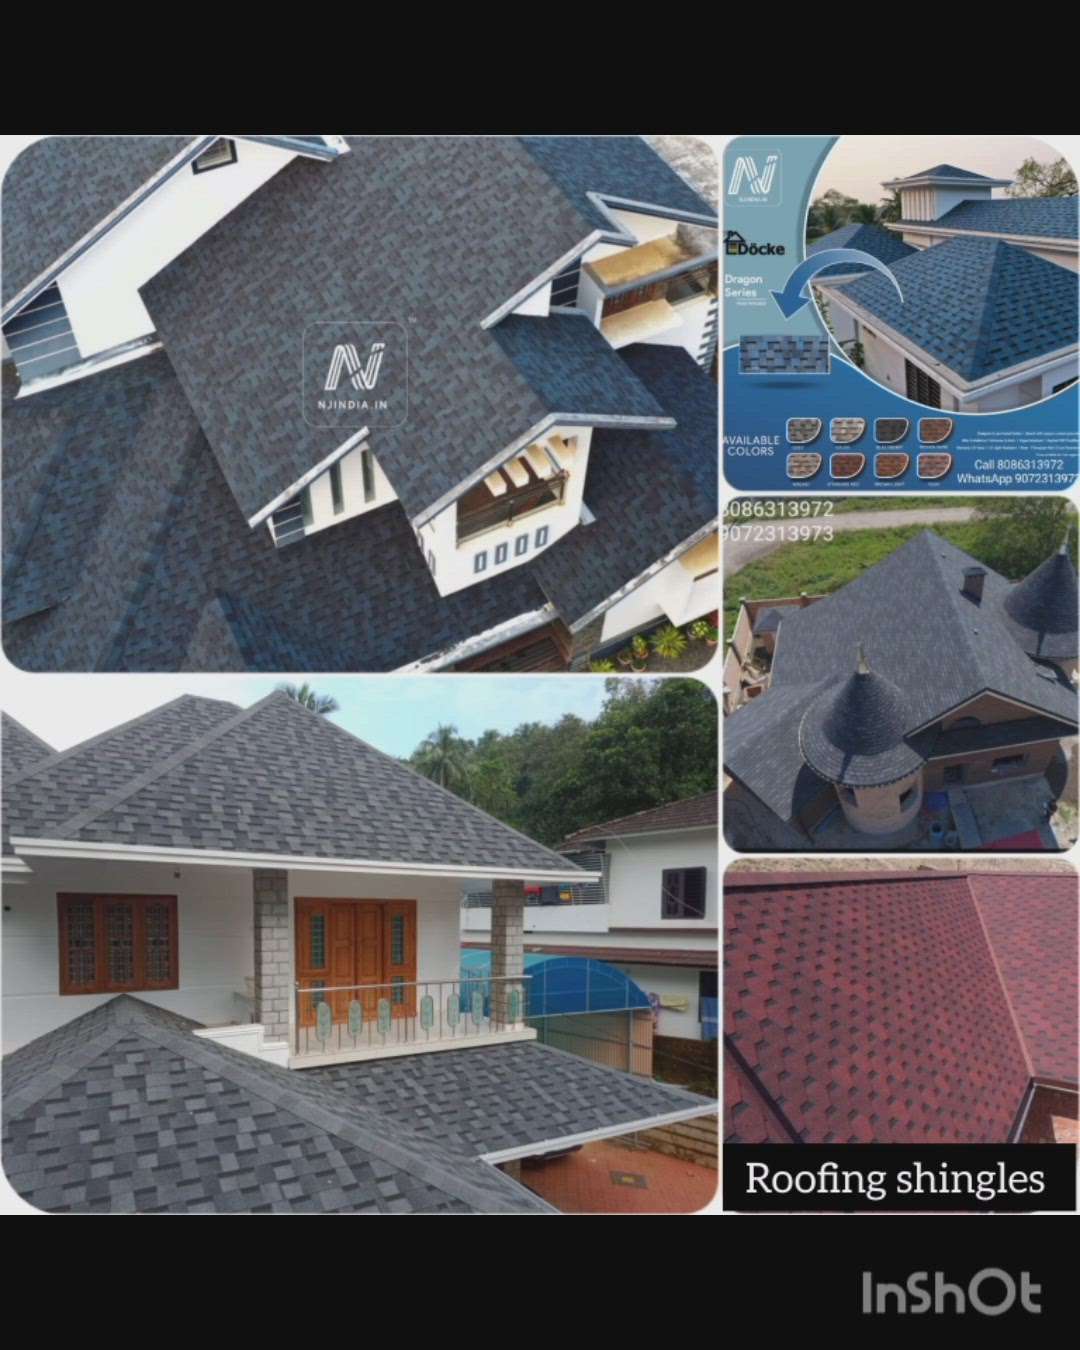 Roofing shingles
Roofing ceramic tiles
Roofing stonecoted sheet
Roofing clay tile
Rain gutter Aluminium,&Upvc
sales,& instalation 
more dtl call8086313972
WhatsApp 9072313973